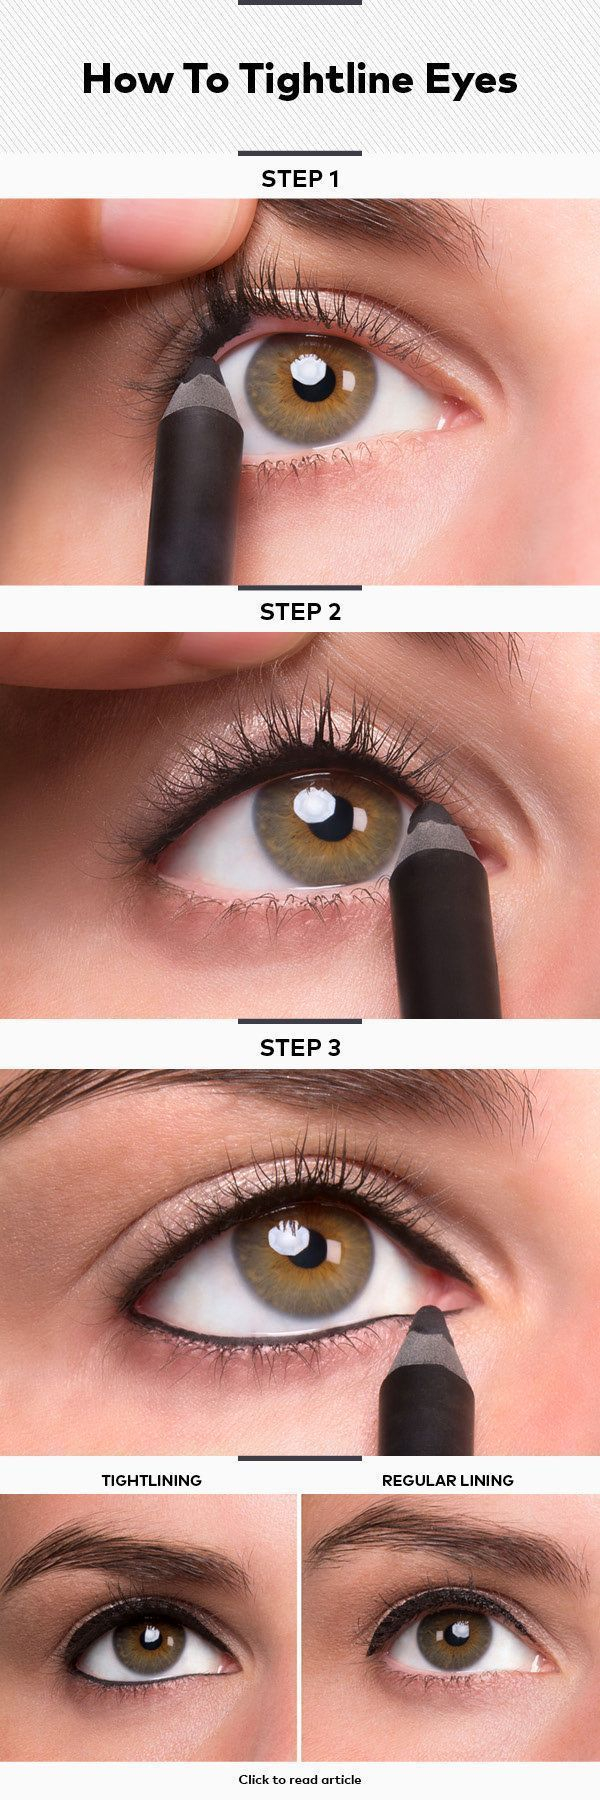 How To Do My Eye Makeup 17 Super Basic Eye Makeup Ideas For Beginners Pretty Designs